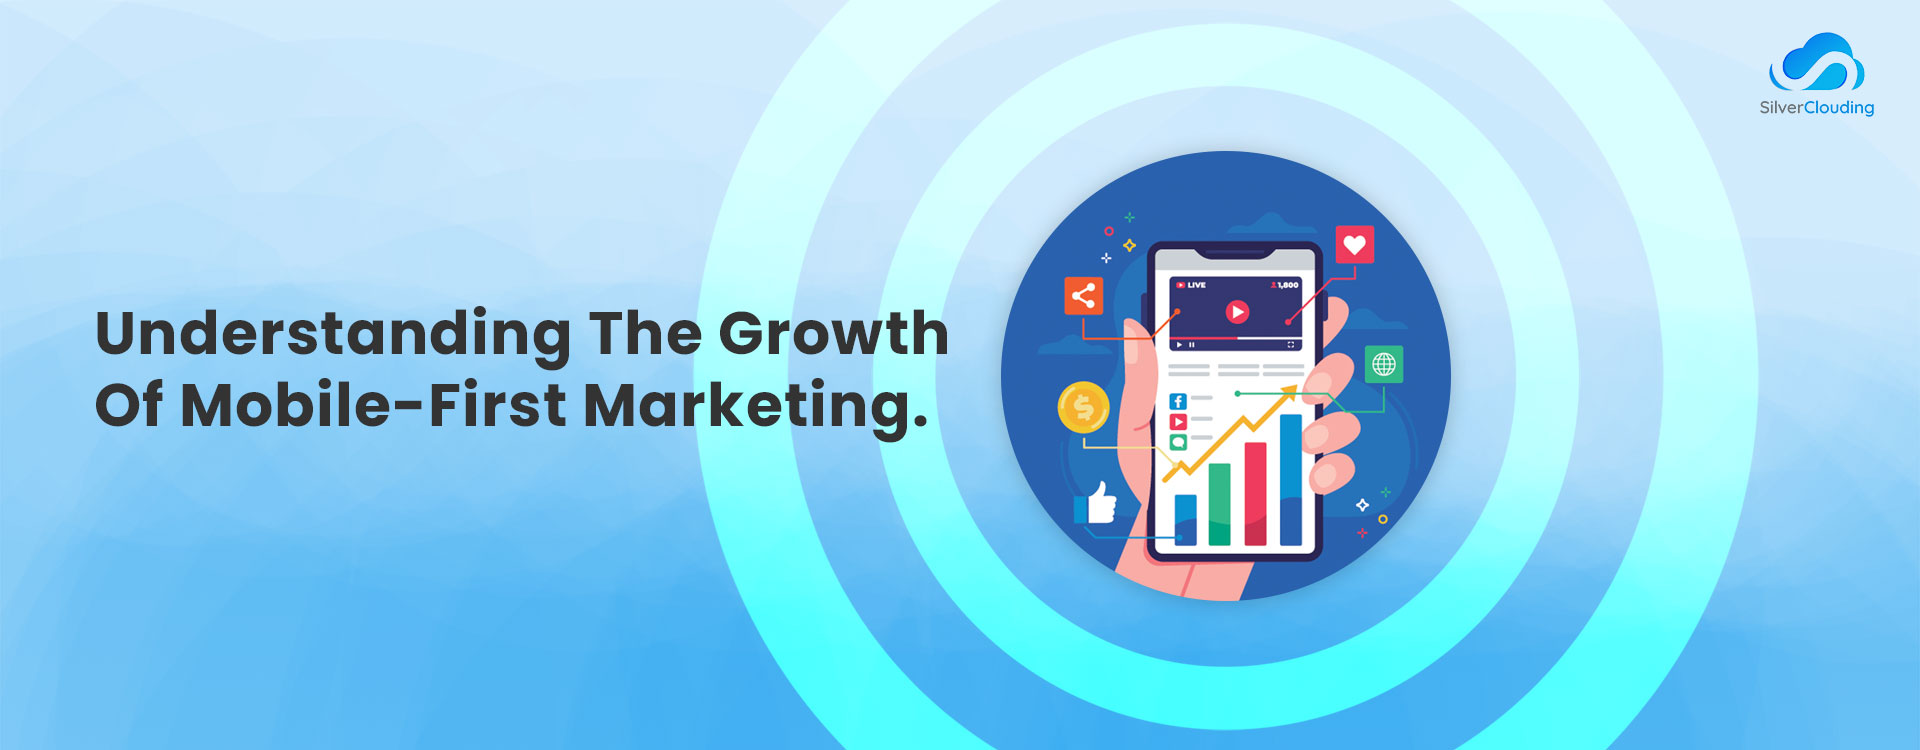 Understanding-The-Growth-Of-Mobile-First-Marketing